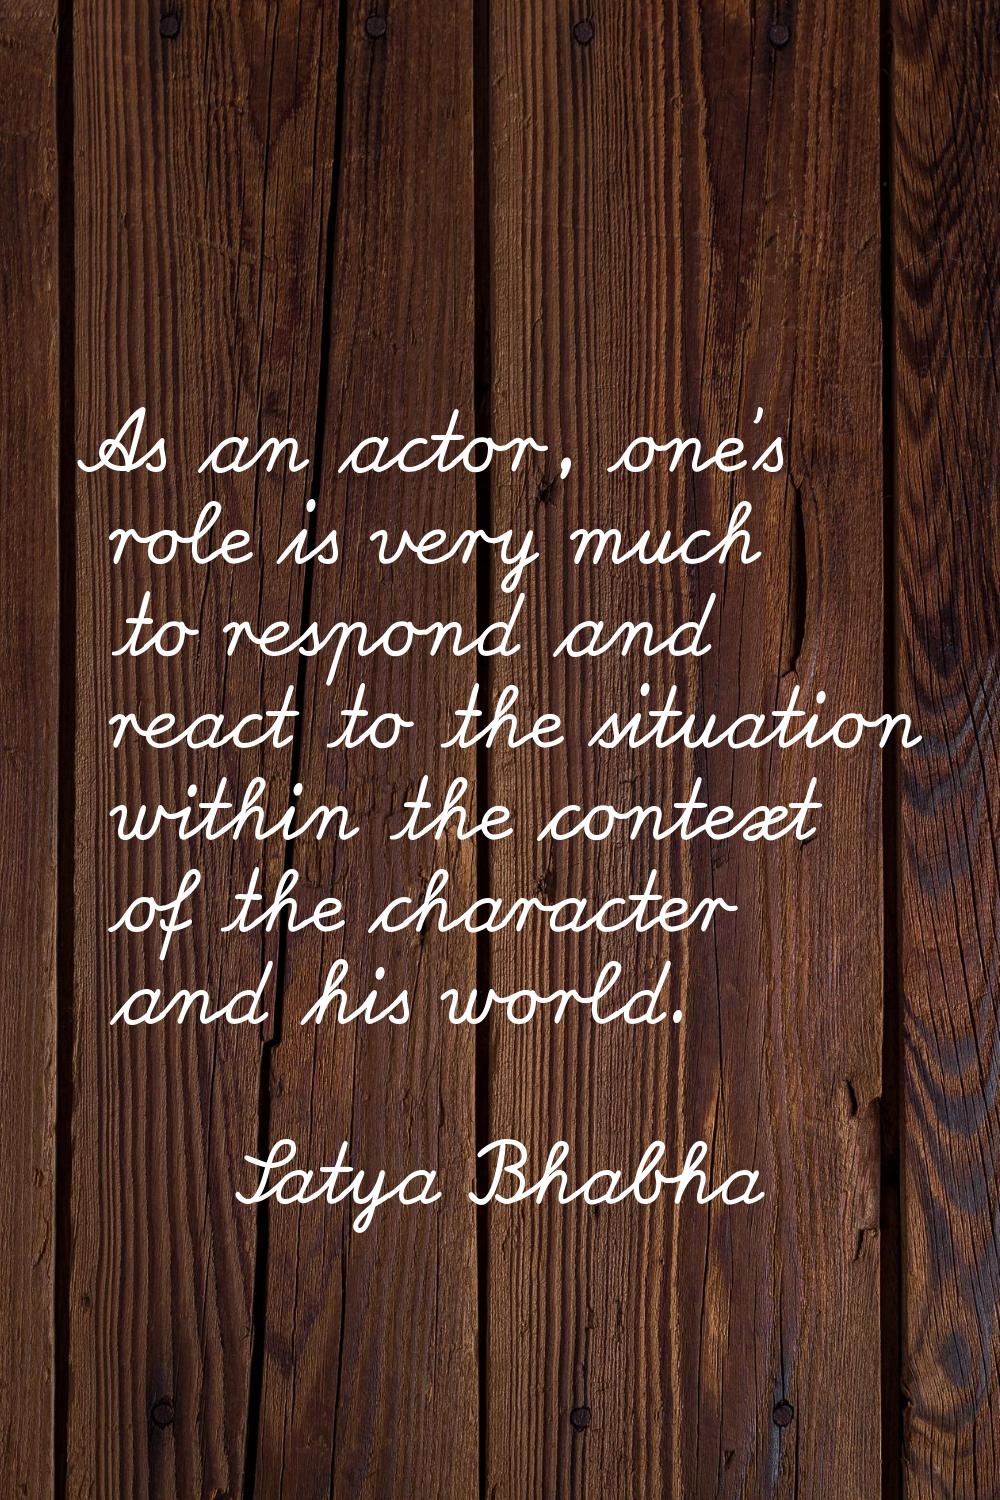 As an actor, one's role is very much to respond and react to the situation within the context of th